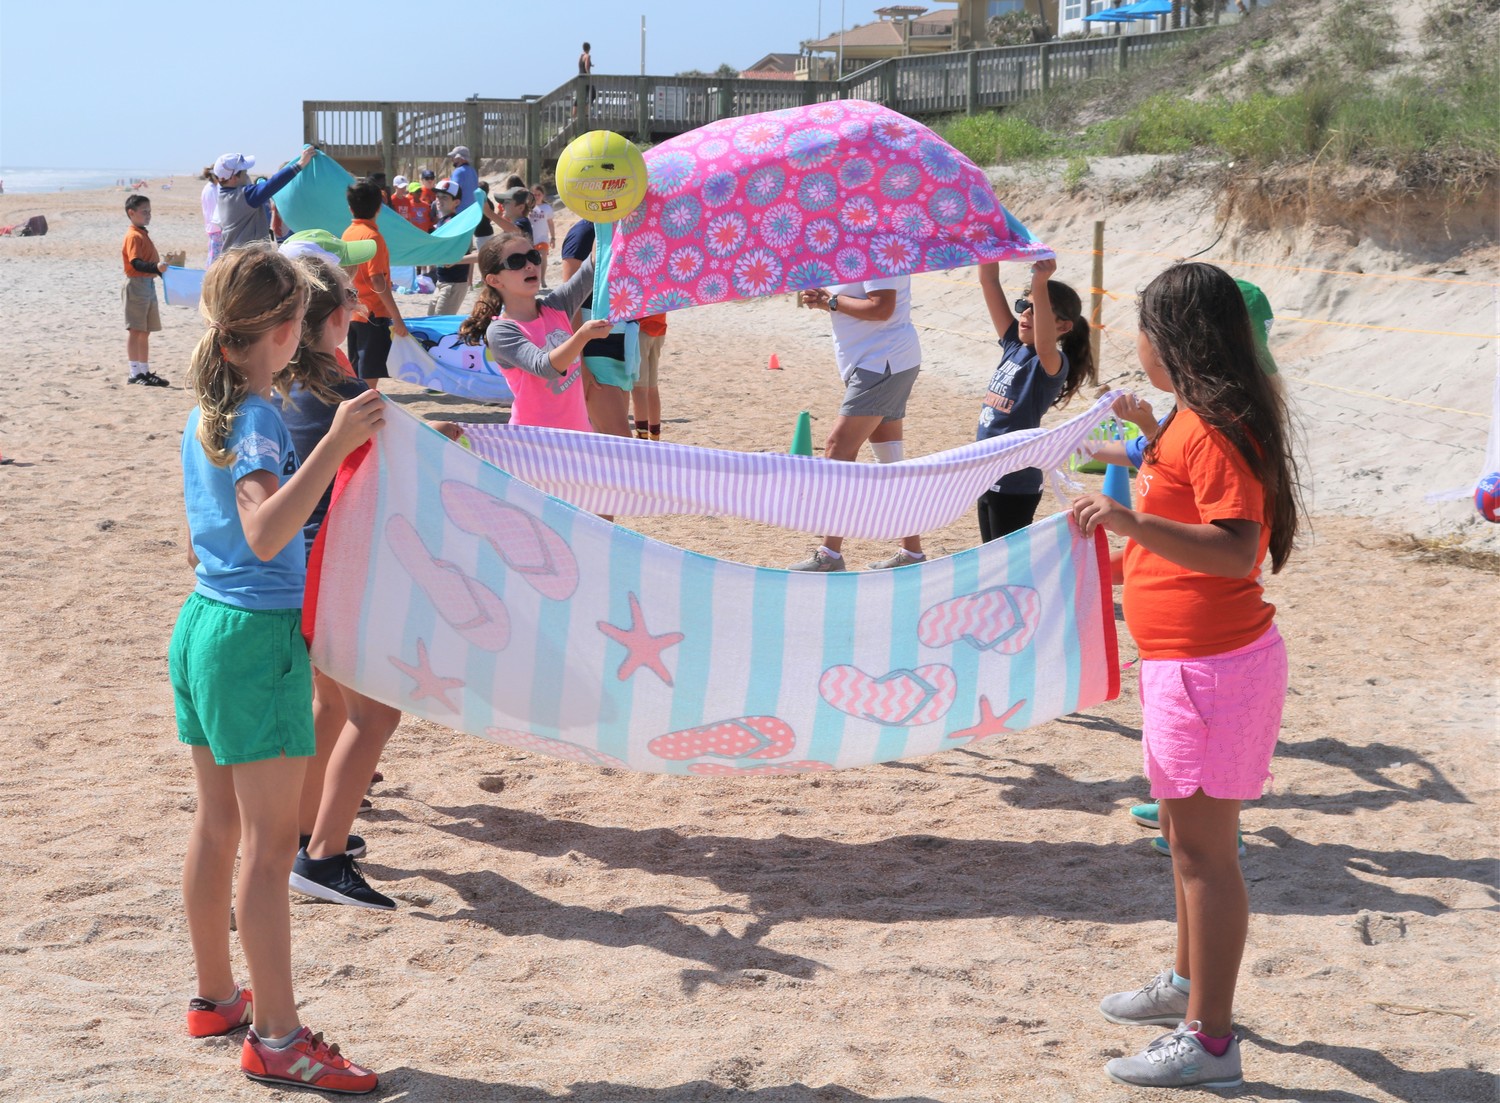 Kids use beach towels to toss volleyballs back and forth.